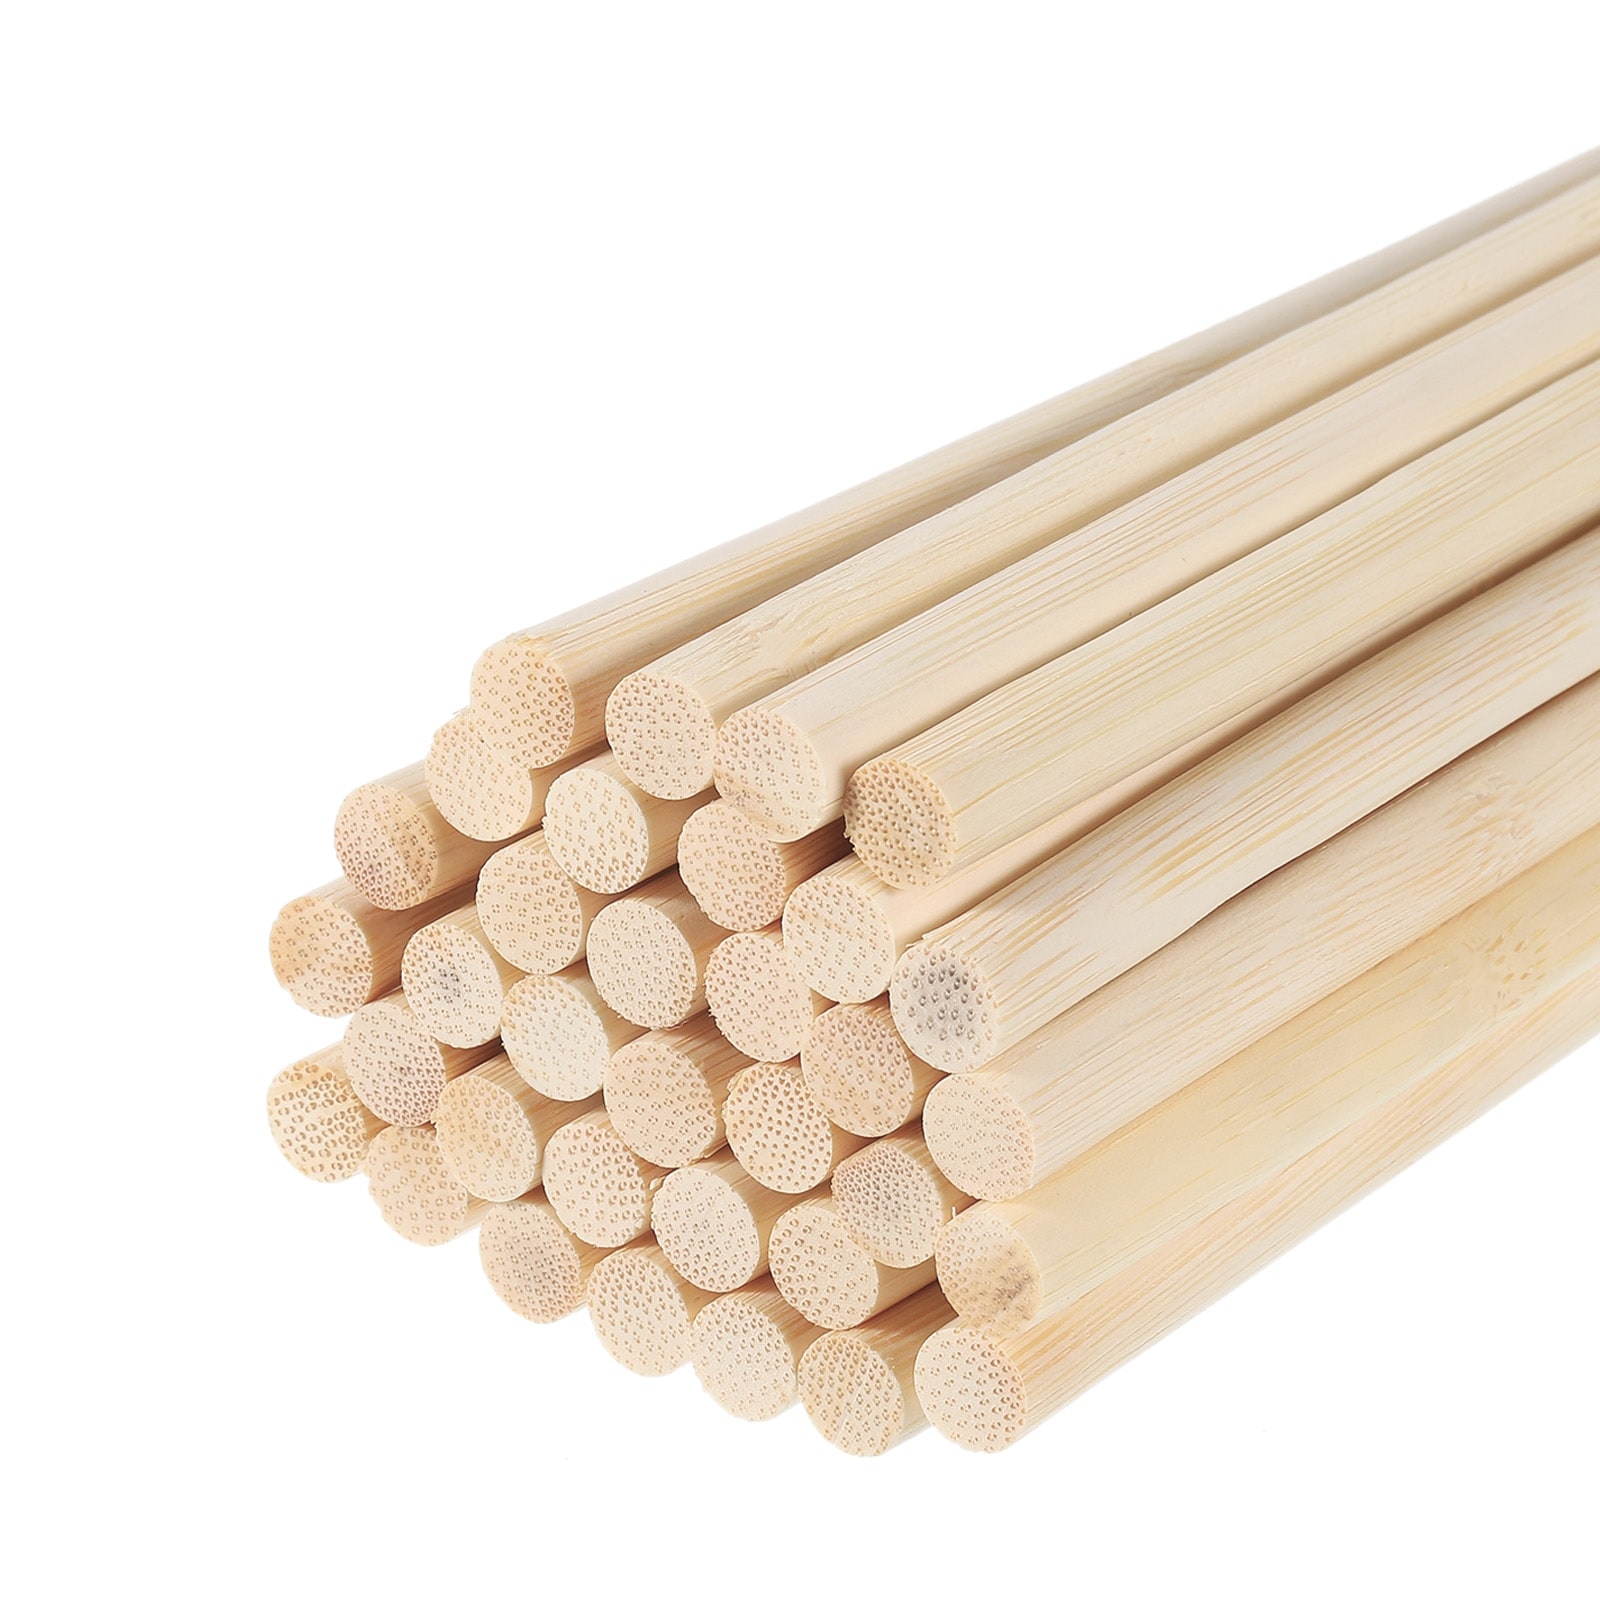 Wooden Dowel Rods 1/4 x 6 Inch Round Wood Sticks Wooden Dowels 600 Pieces